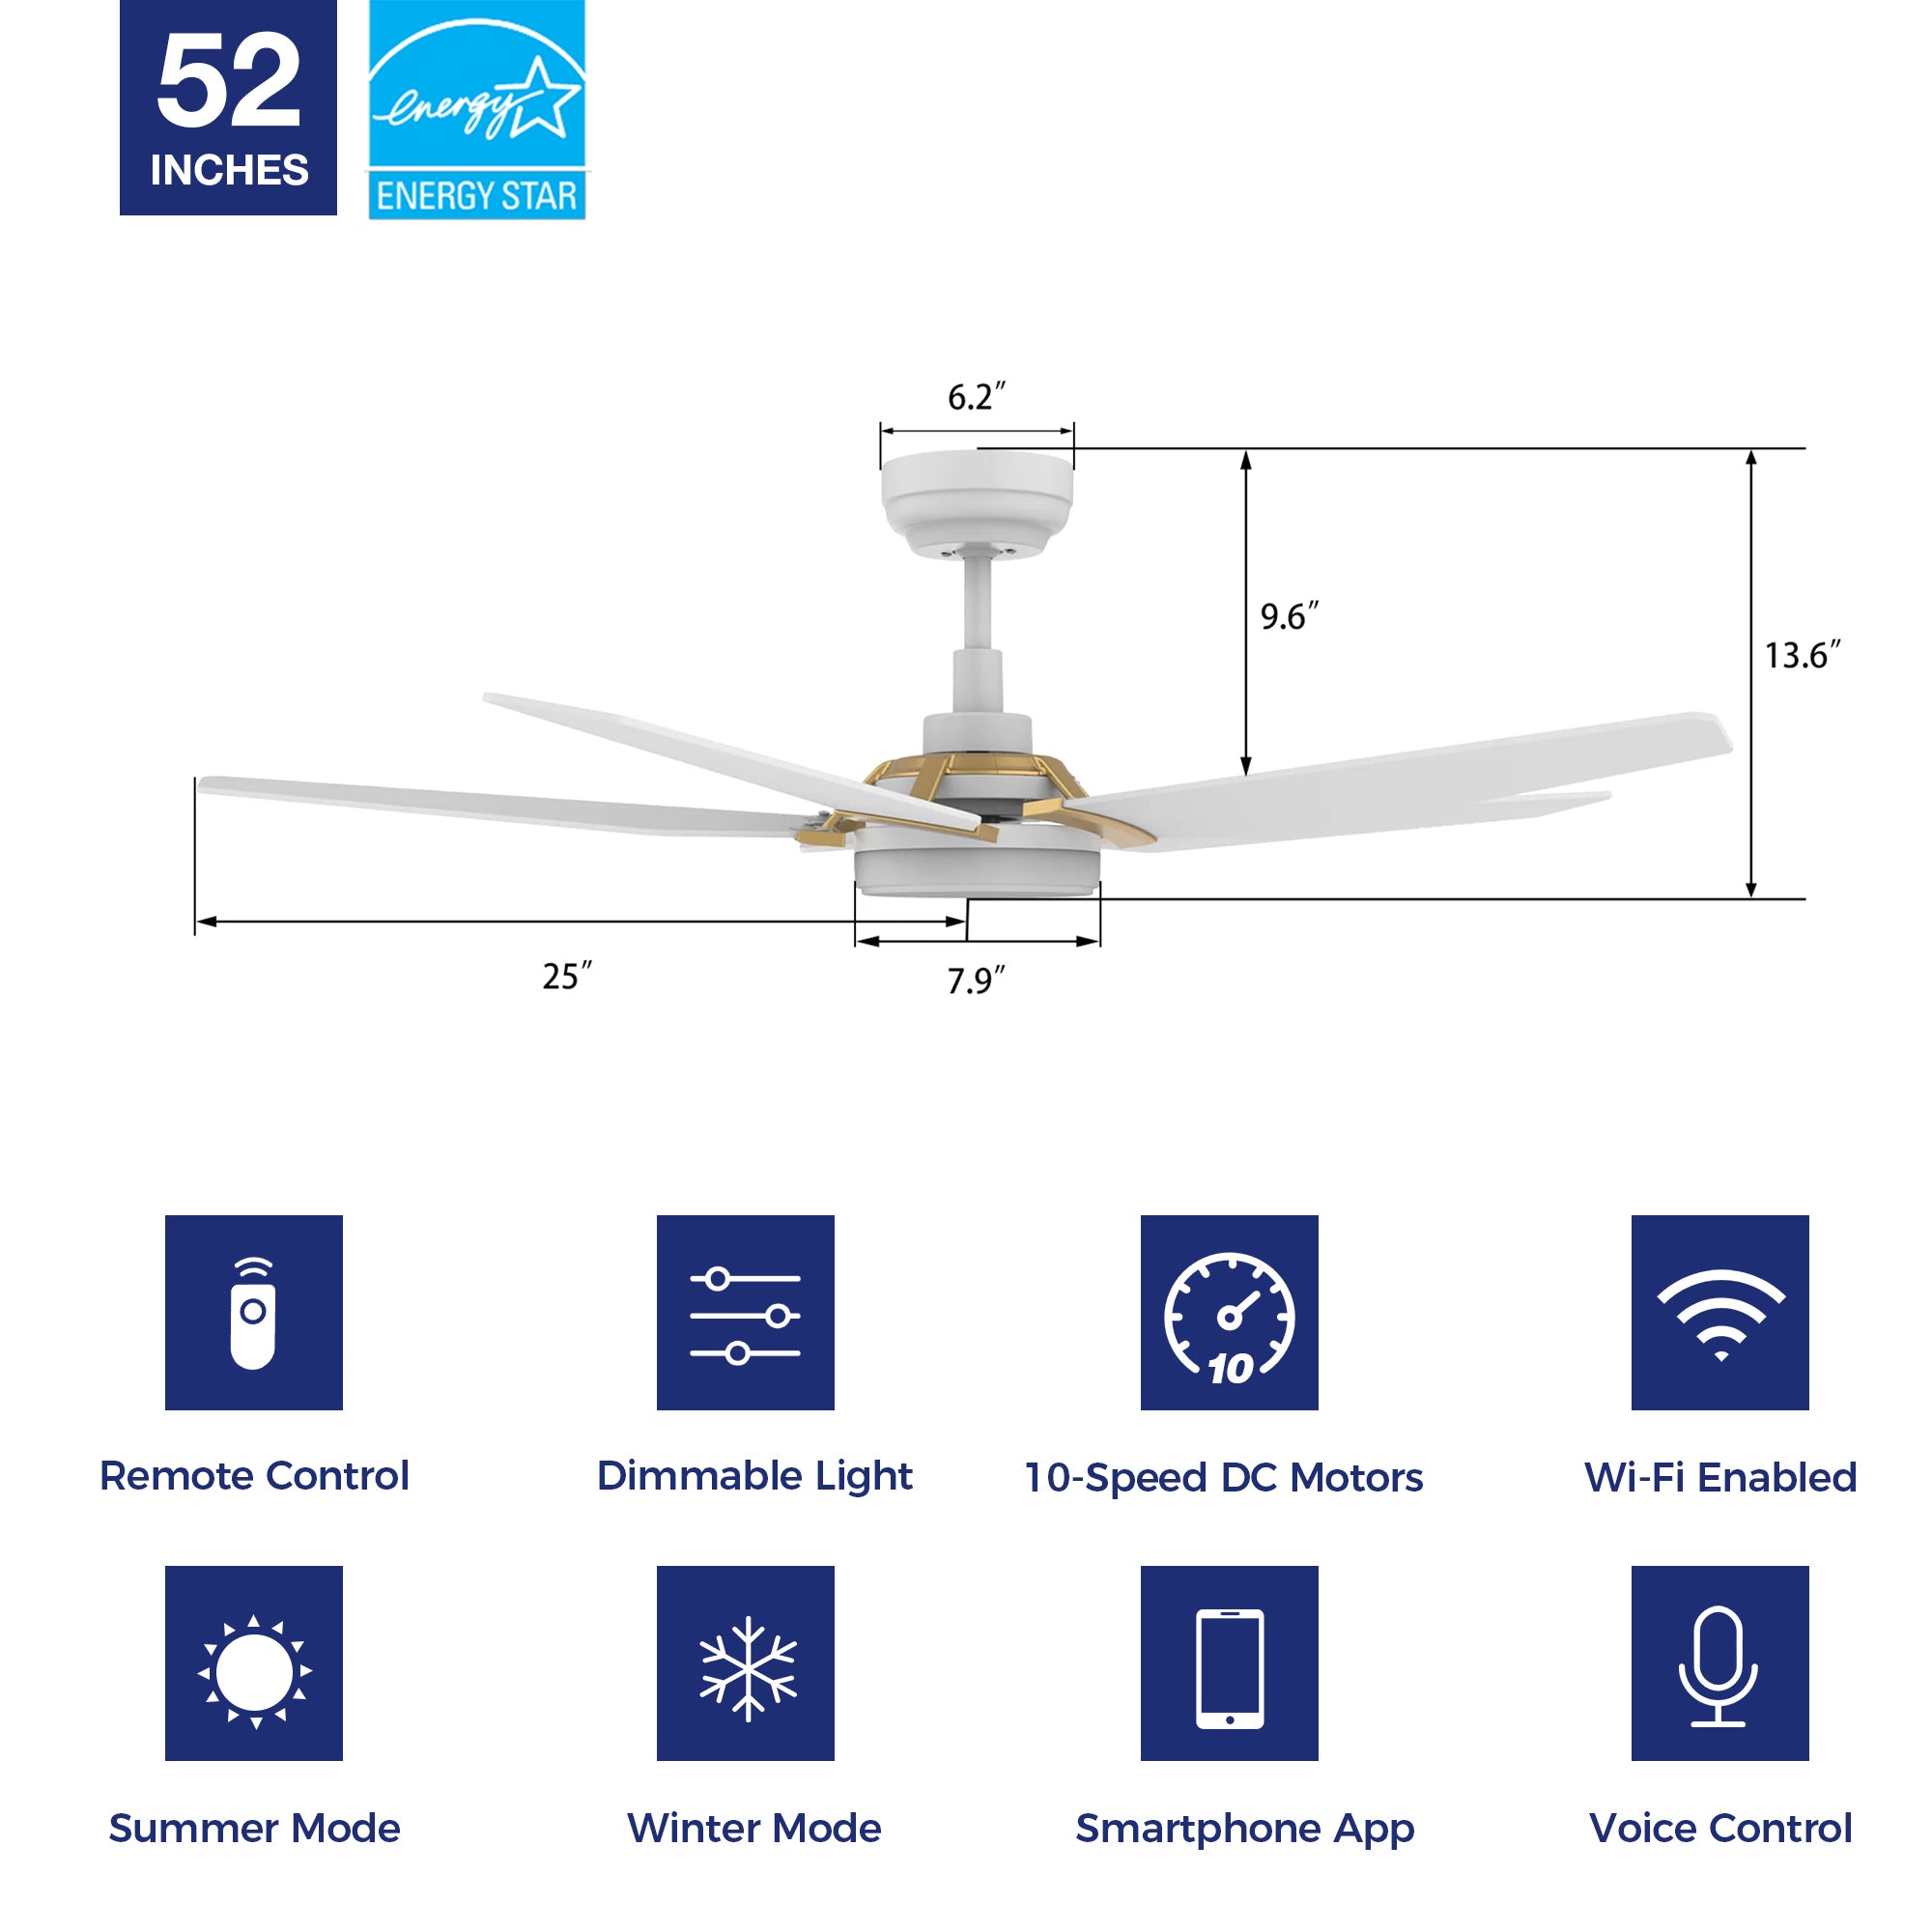 This Voyager 52&#39;&#39; smart ceiling fan keeps your space cool, bright, and stylish. It is a soft modern masterpiece perfect for your large indoor living spaces. This Wifi smart ceiling fan is a simplicity designing with White finish, use elegant Plywood blades, Glass shade and has an integrated 4000K LED daylight. The fan features Remote control, Wi-Fi apps, Siri Shortcut and Voice control technology (compatible with Amazon Alexa and Google Home Assistant ) to set fan preferences.